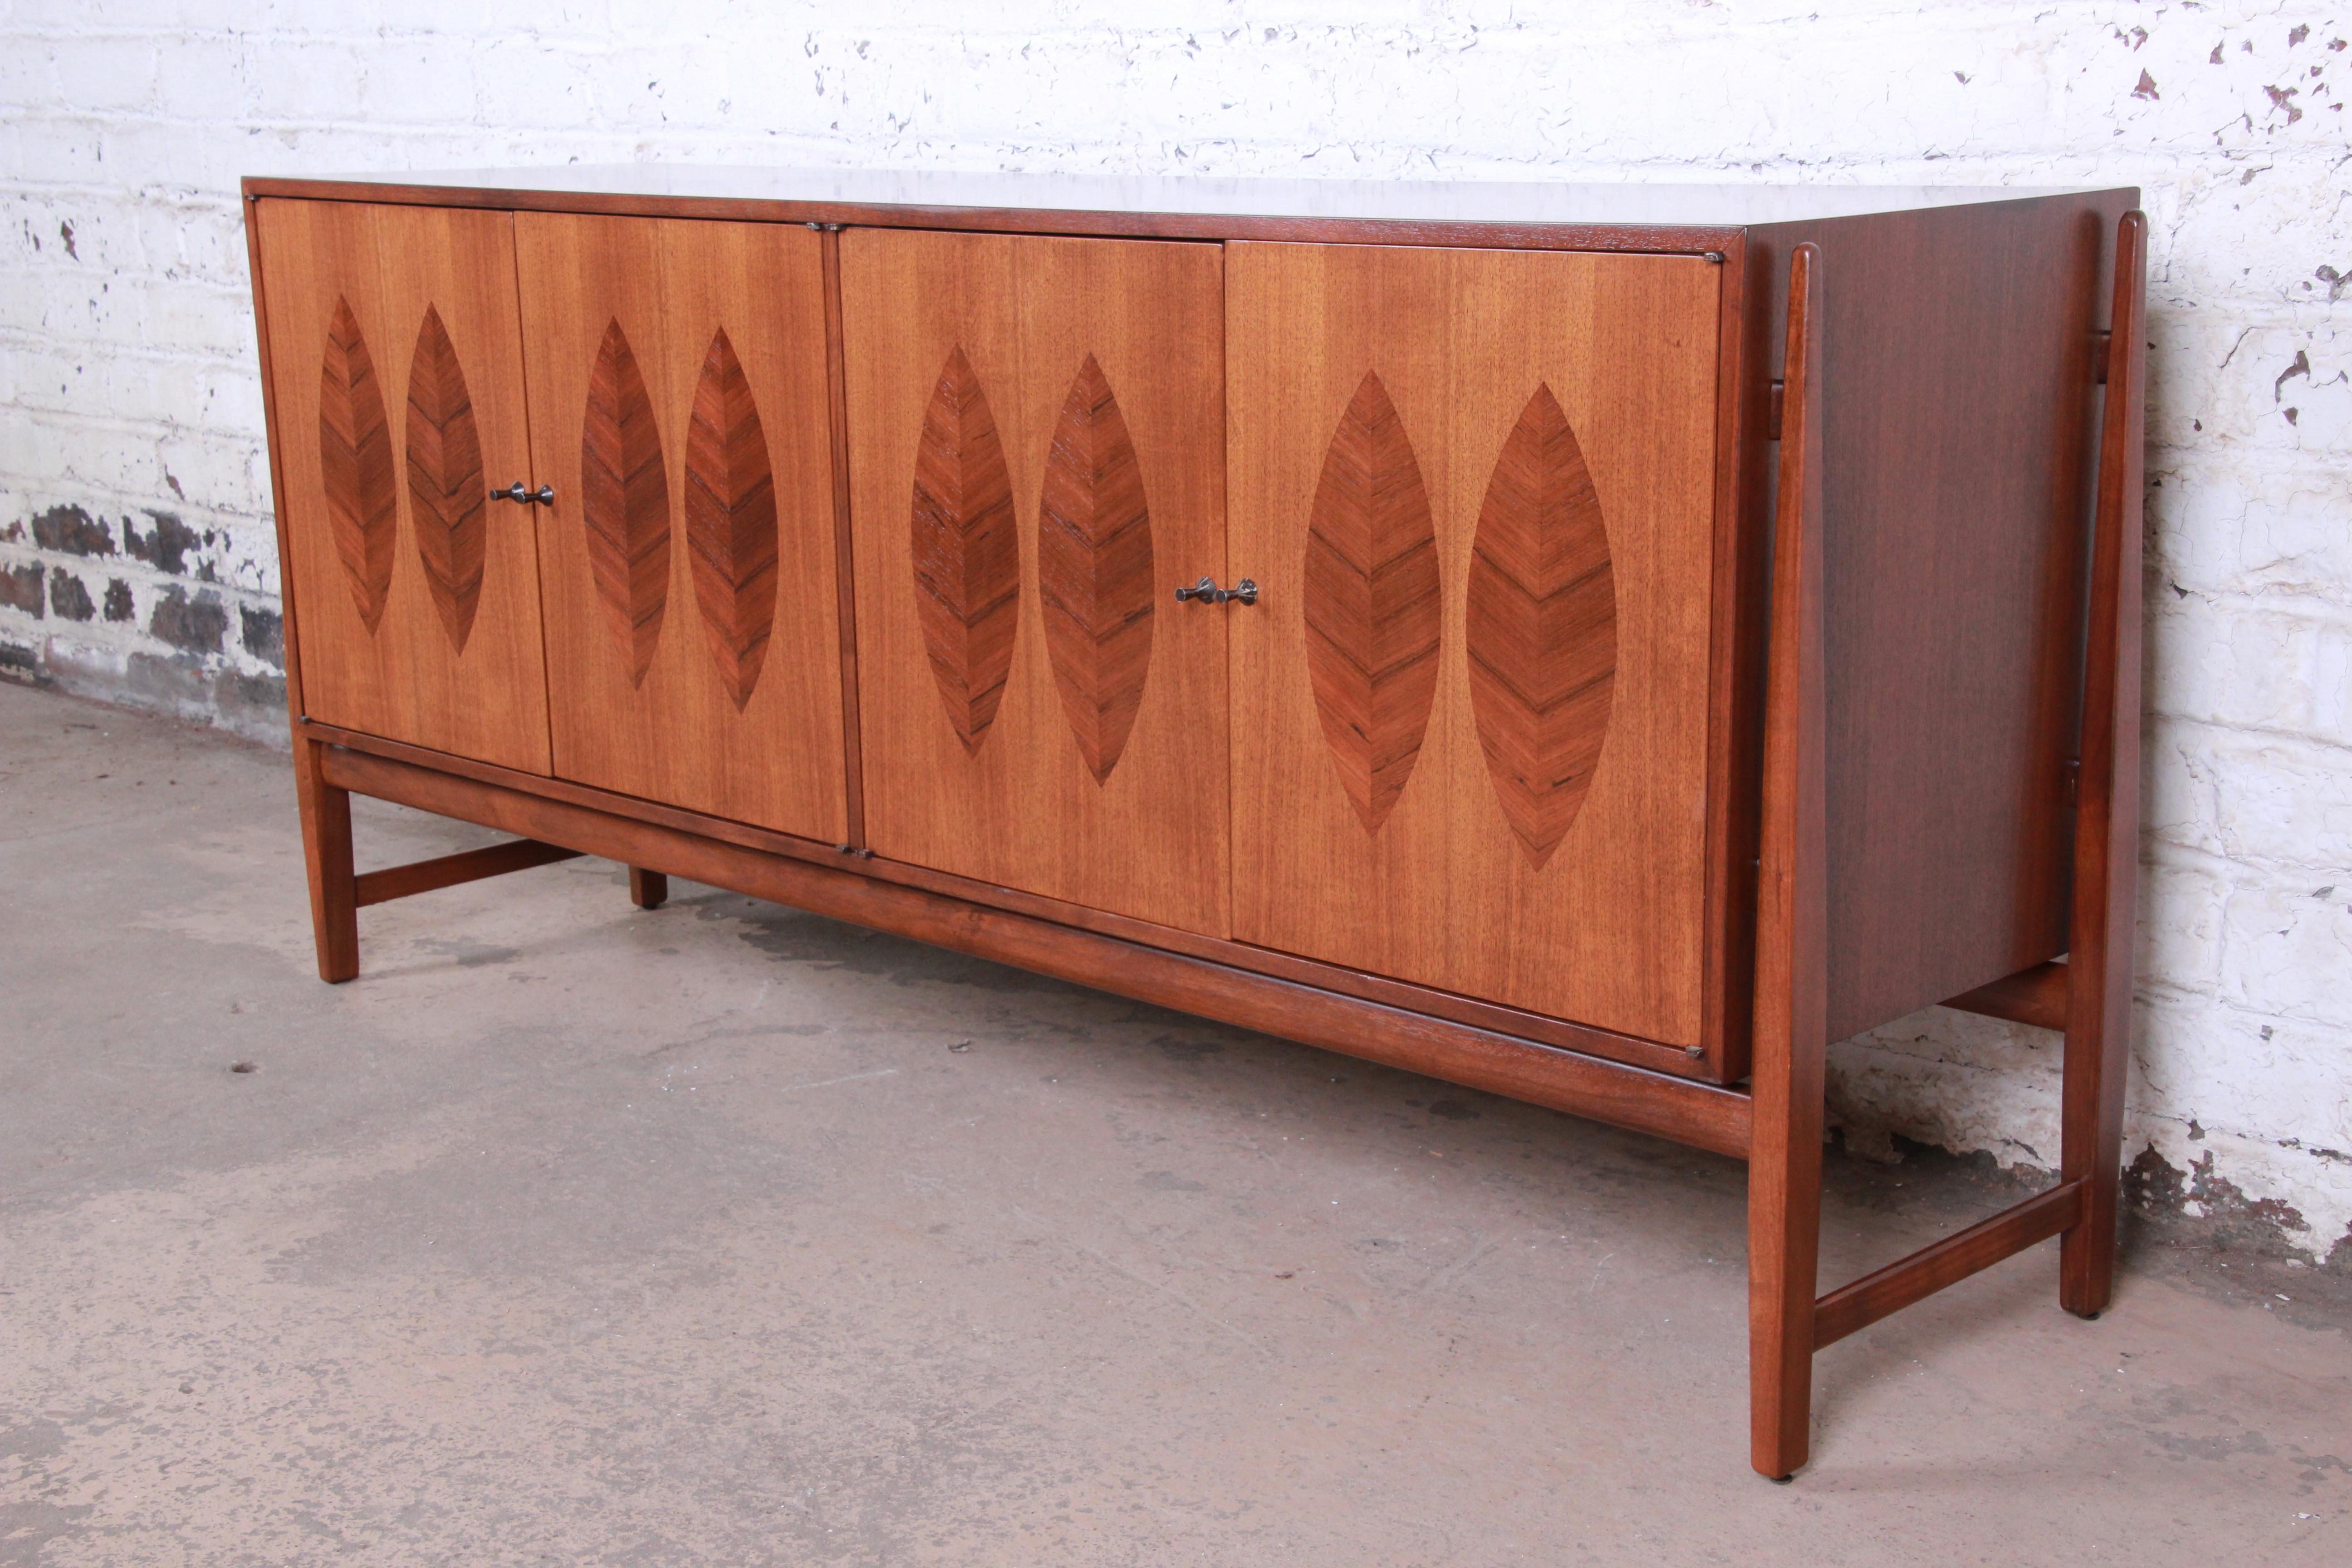 An exceptional Mid-Century Modern credenza or bar cabinet designed by Kipp Stewart for his American Design Foundation line for Calvin Furniture. The credenza features stunning walnut wood grain with leaf inspired rosewood inlays. It offers ample